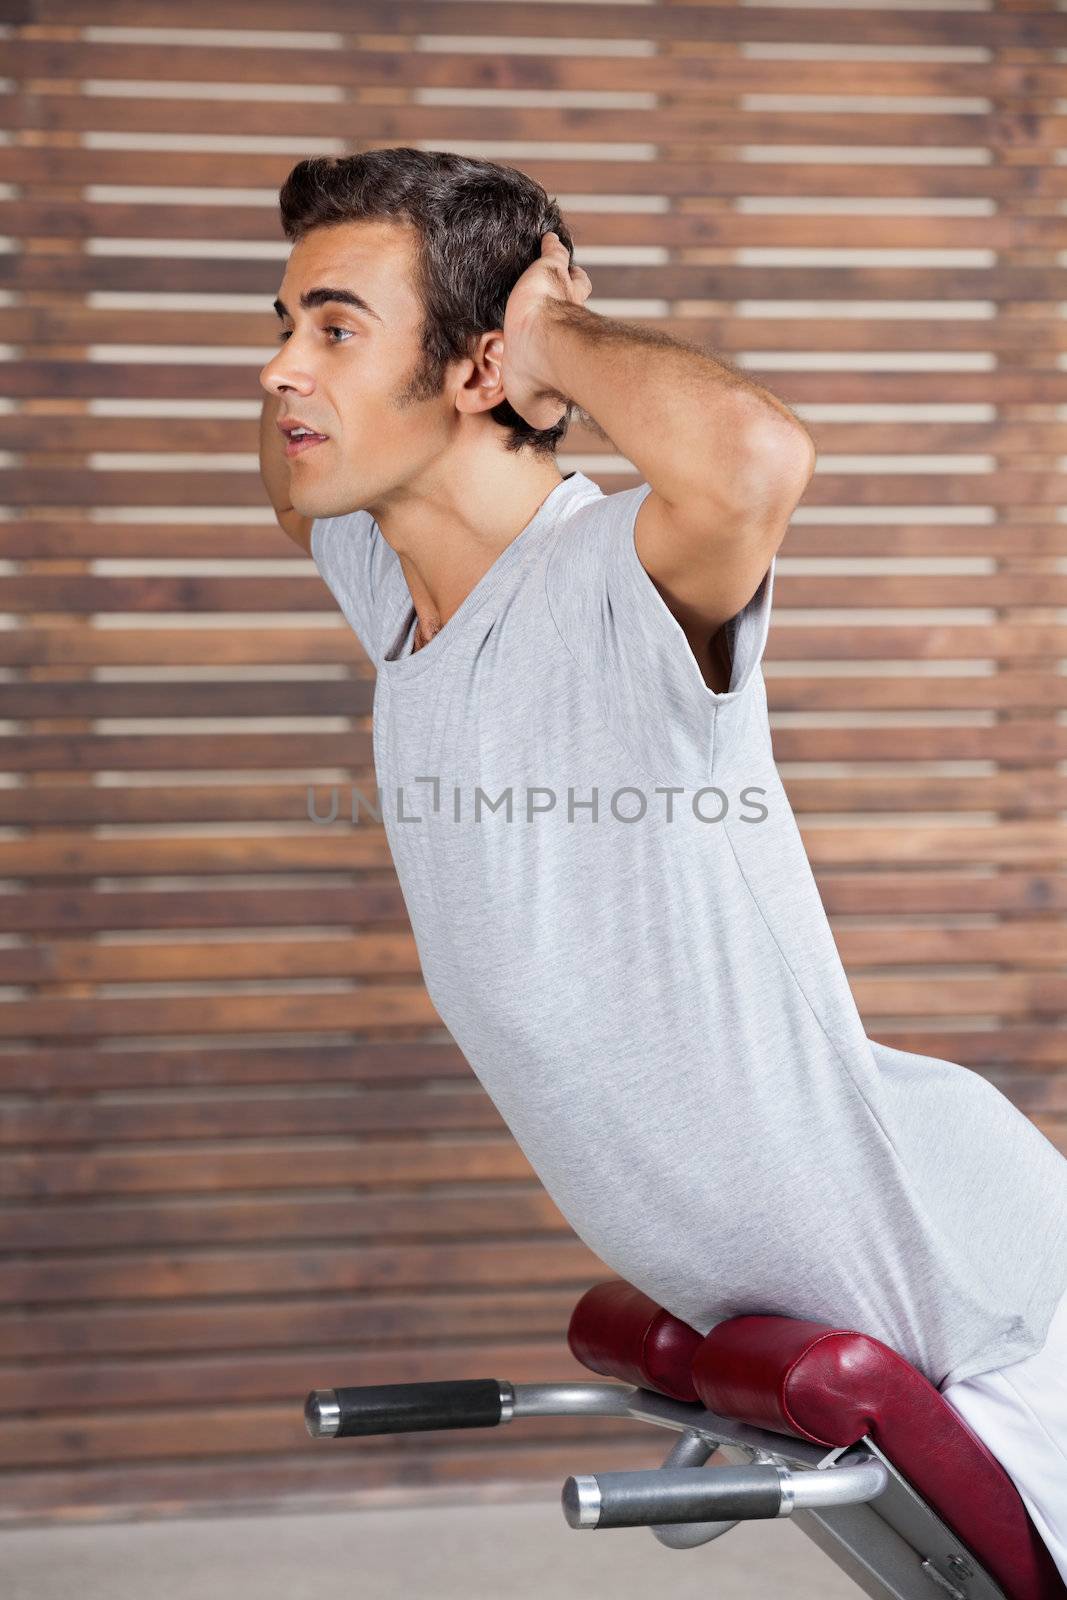 Side view of young man exercising on machine in health club